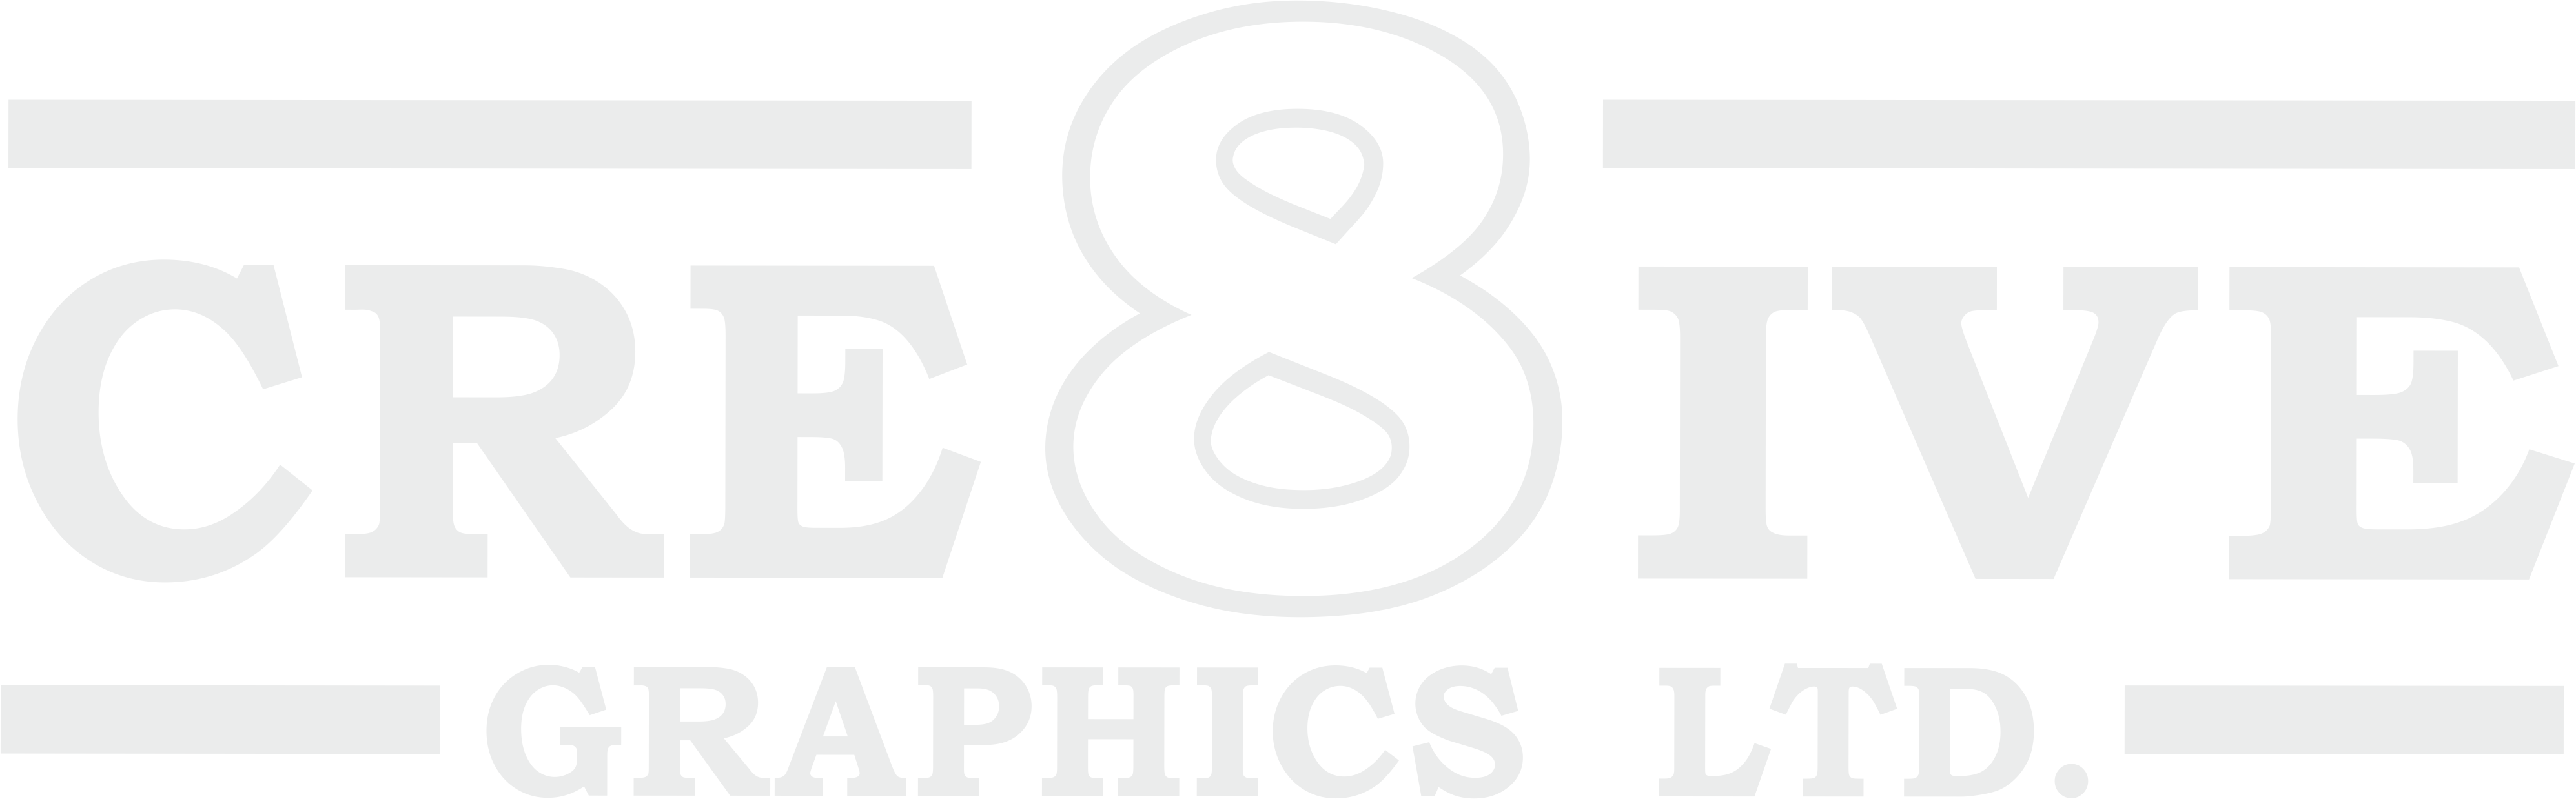 Cre8ive Graphics